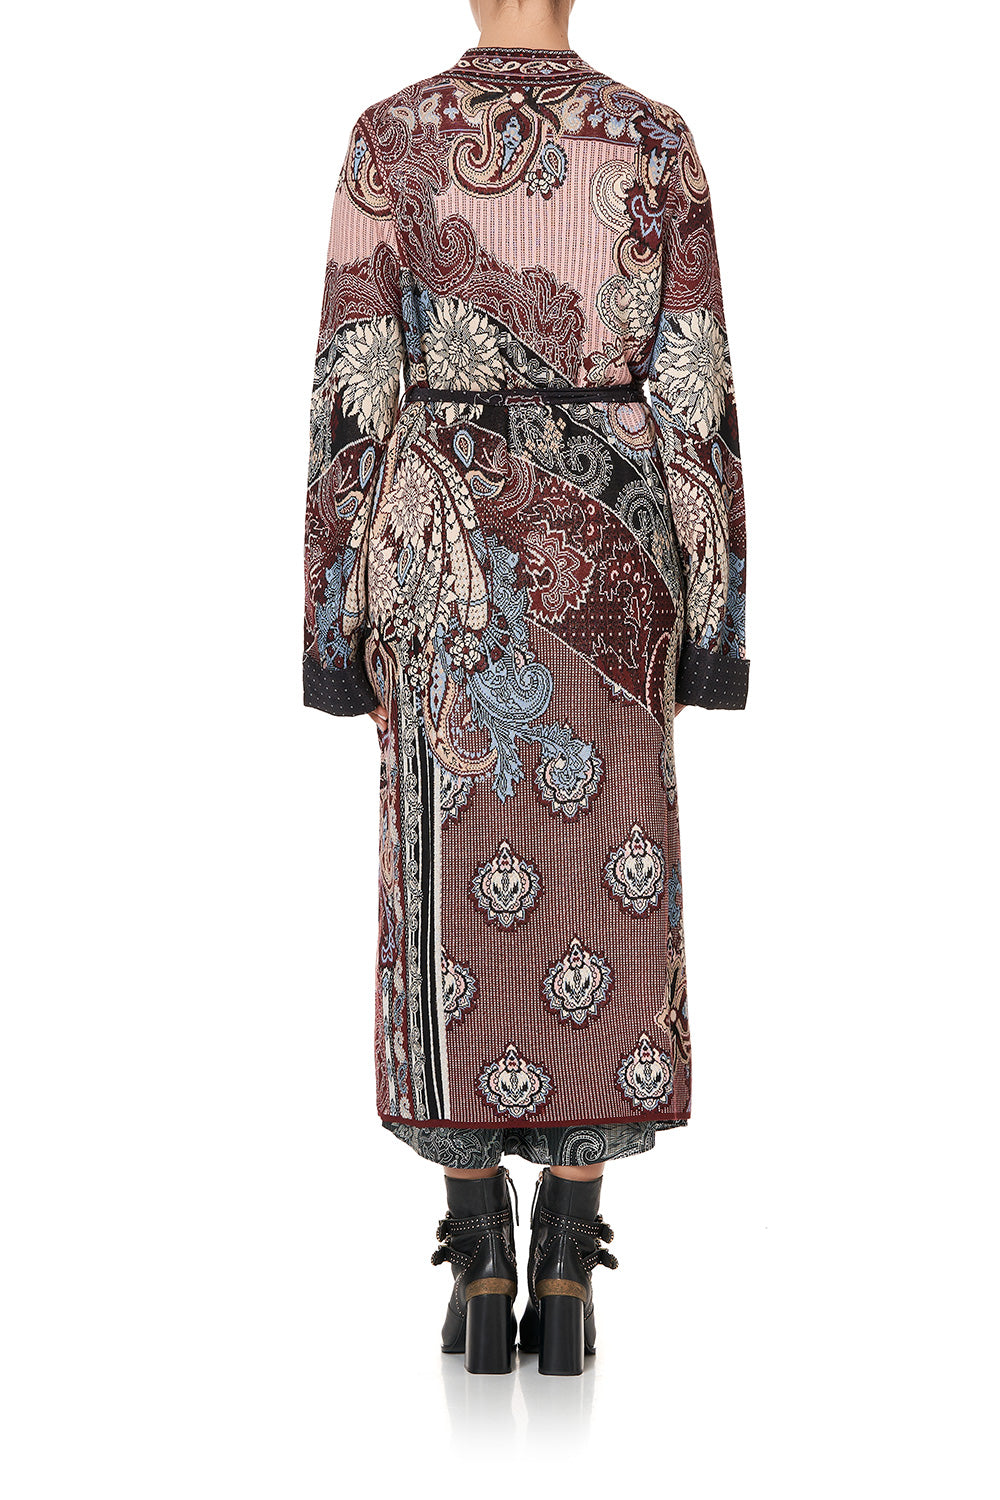 KNIT COAT WITH WOVEN DETAIL TALE OF THE FIRE BIRD